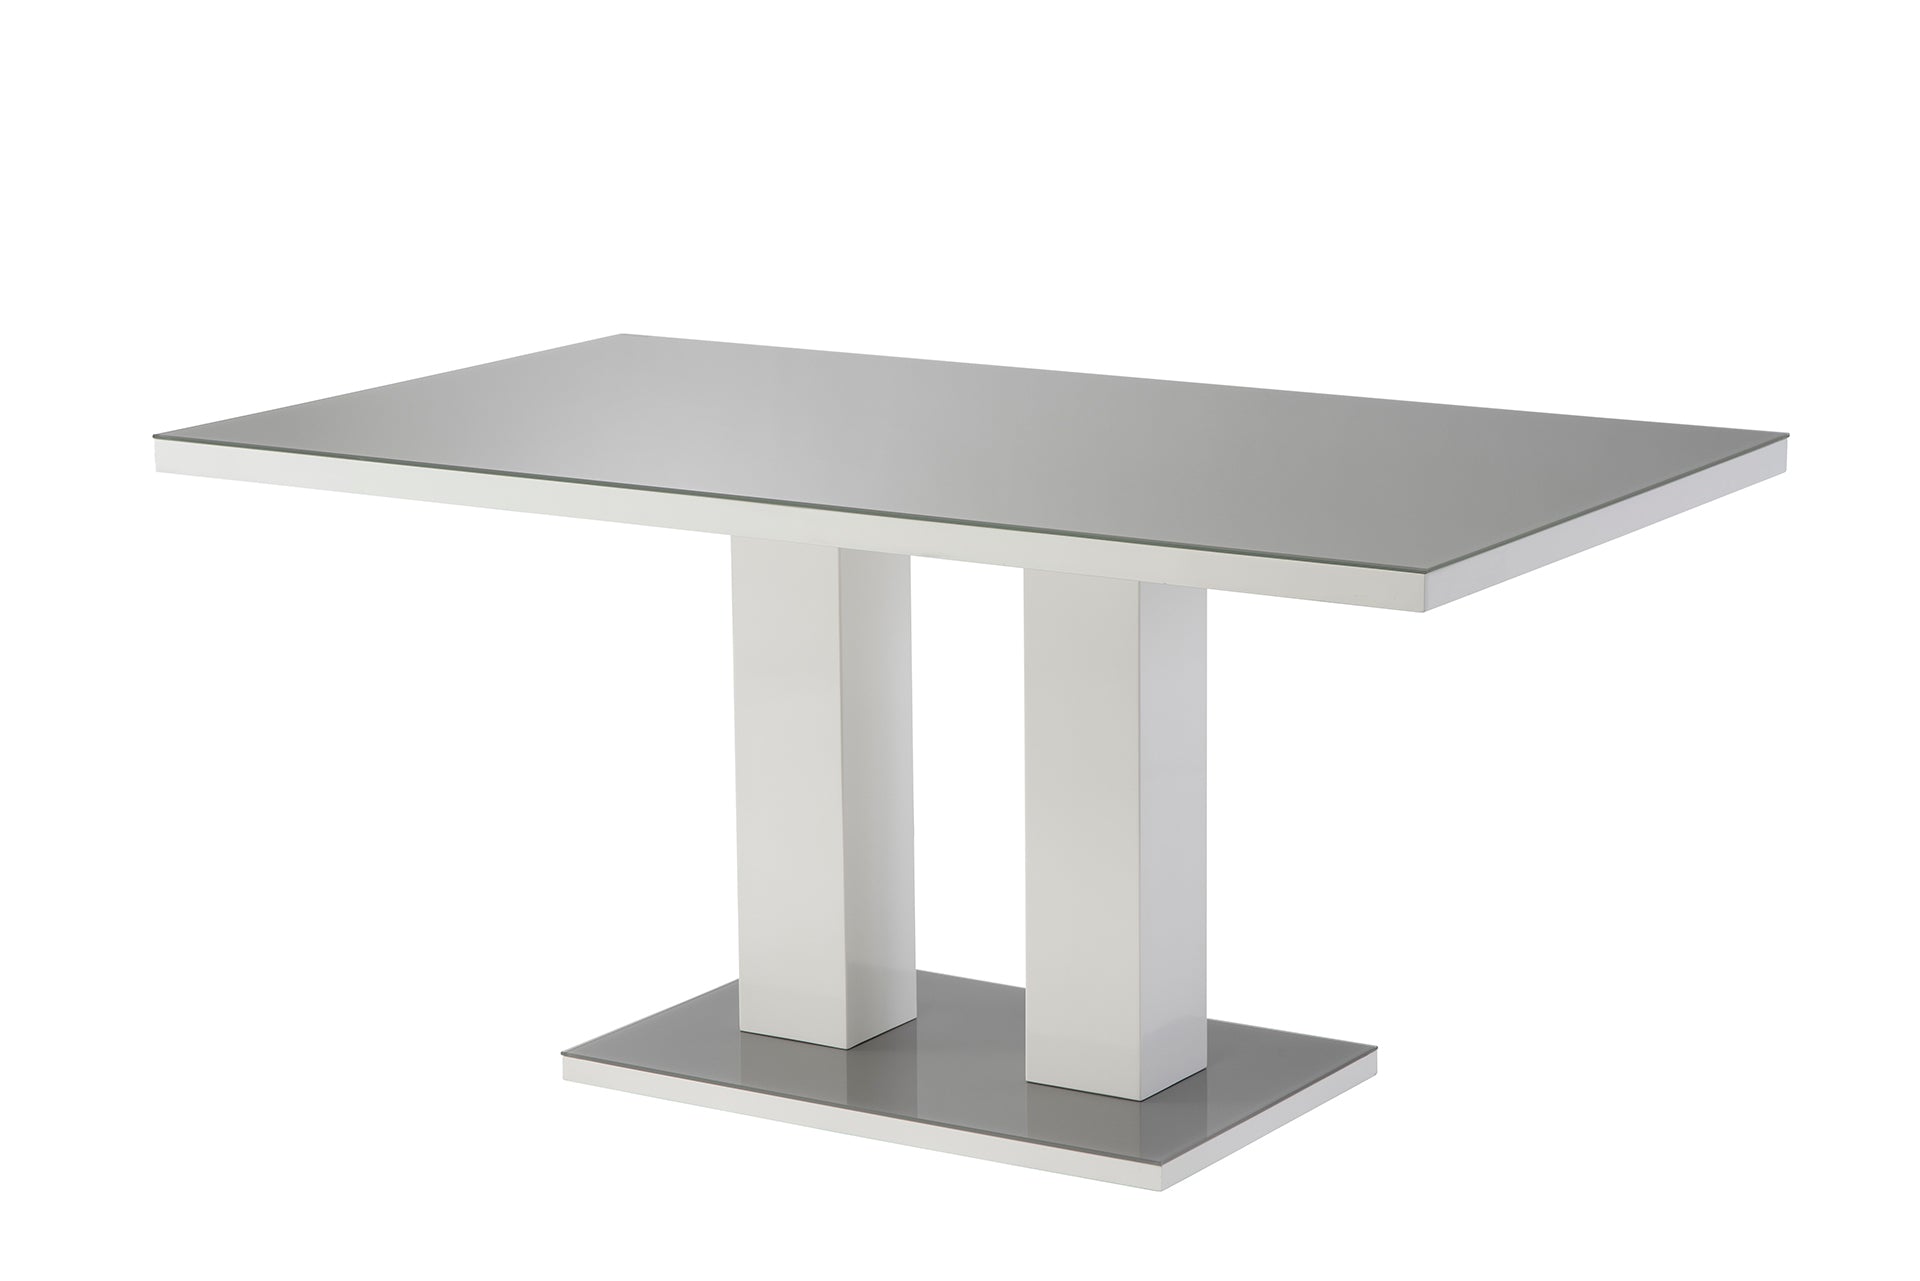 1.6 m table